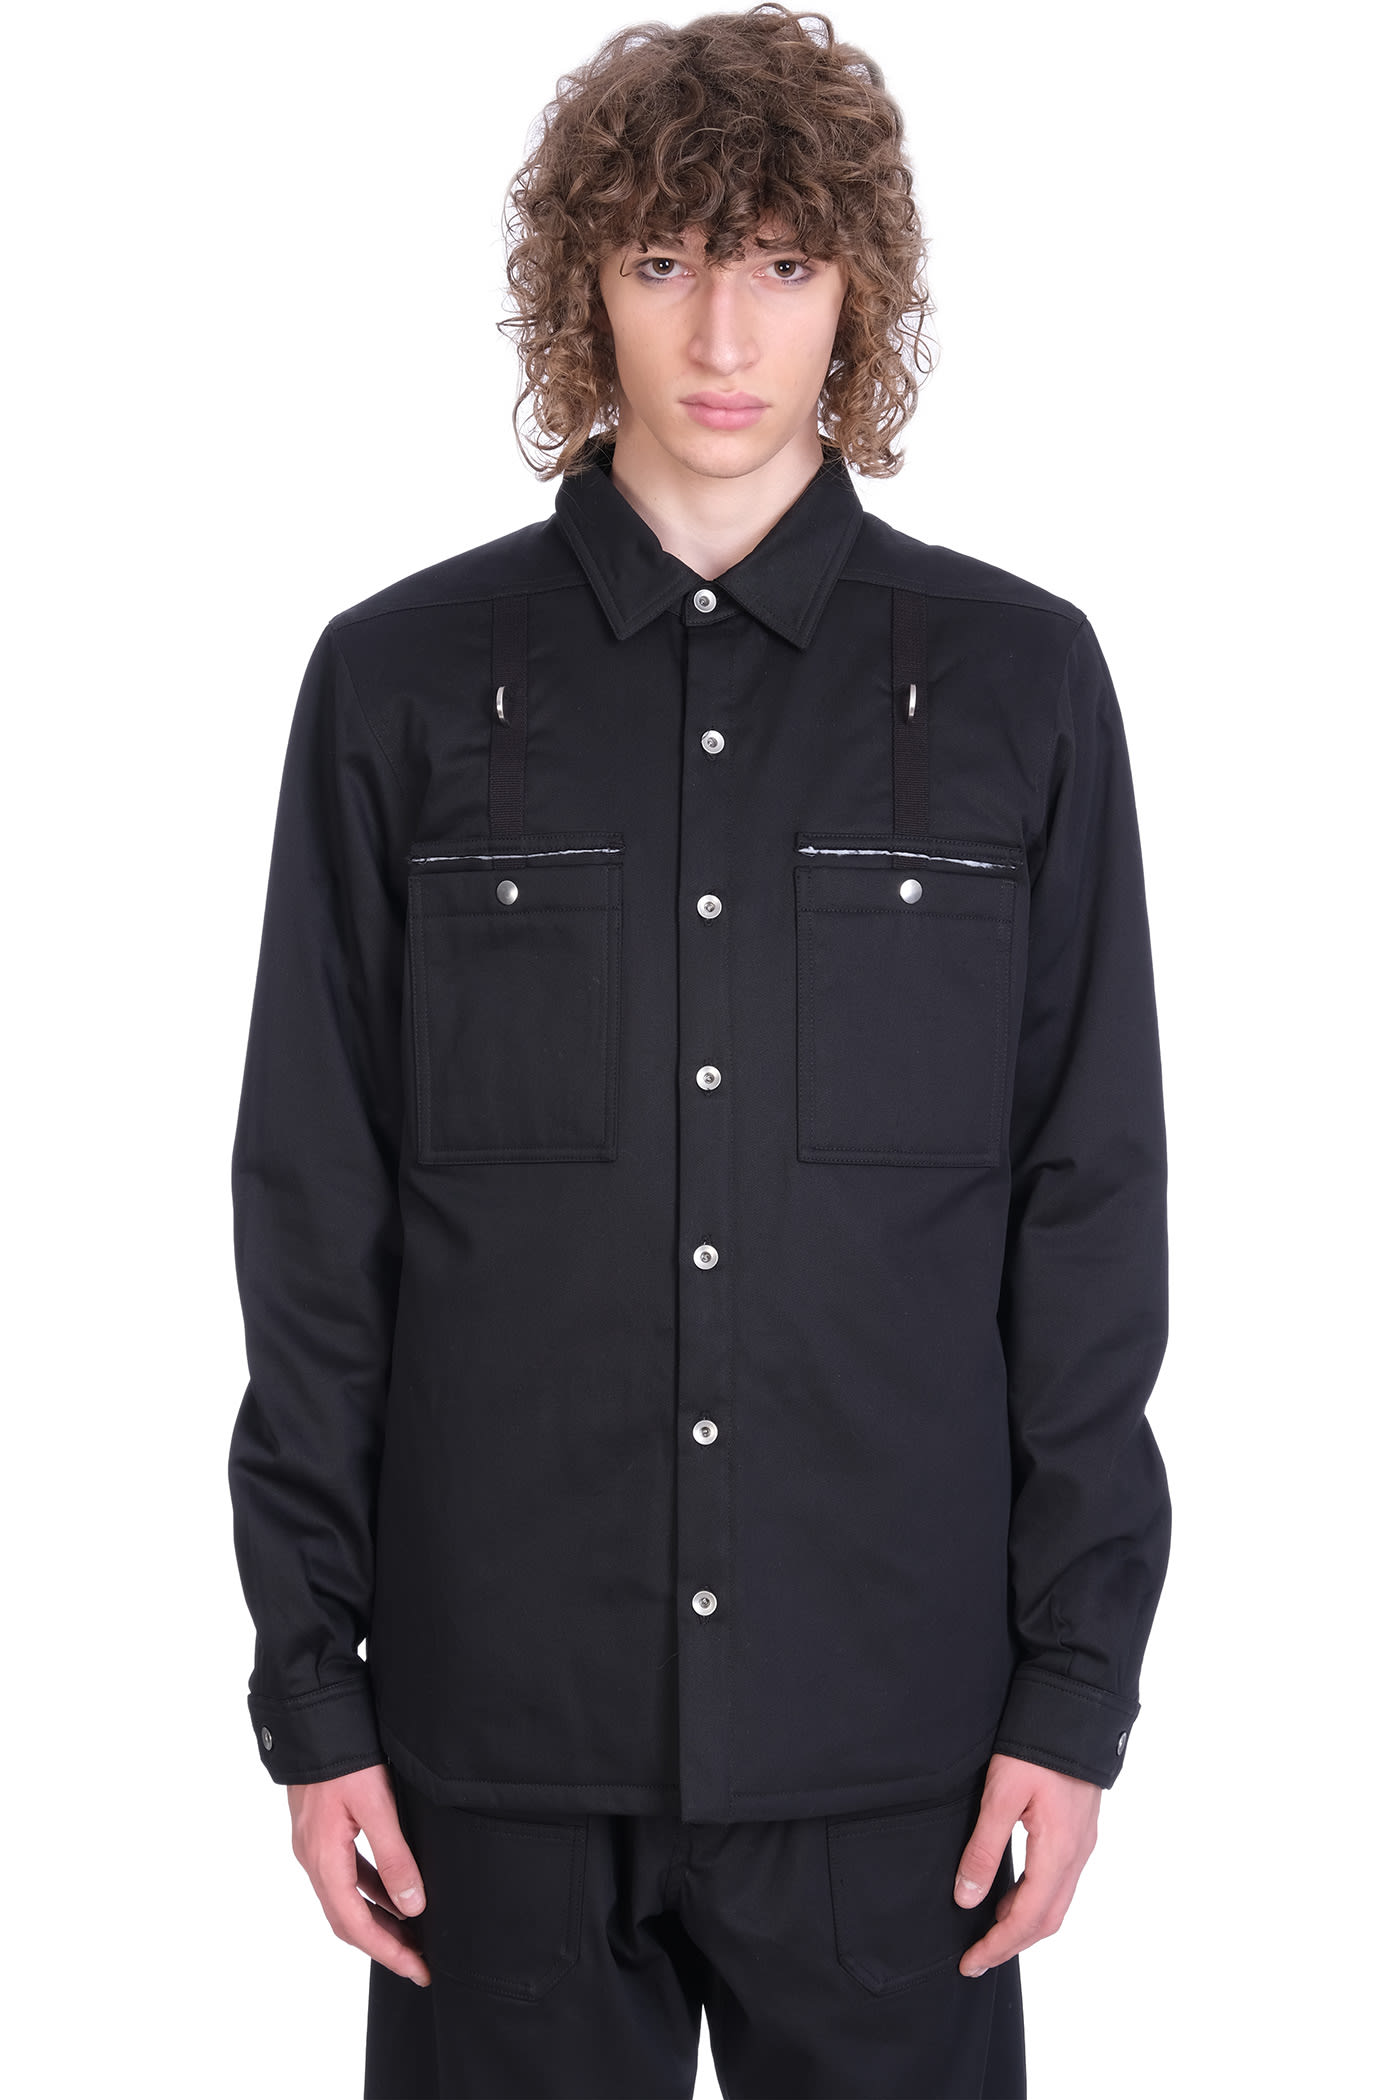 DRKSHDW Outhershirt Puffer In Black Cotton